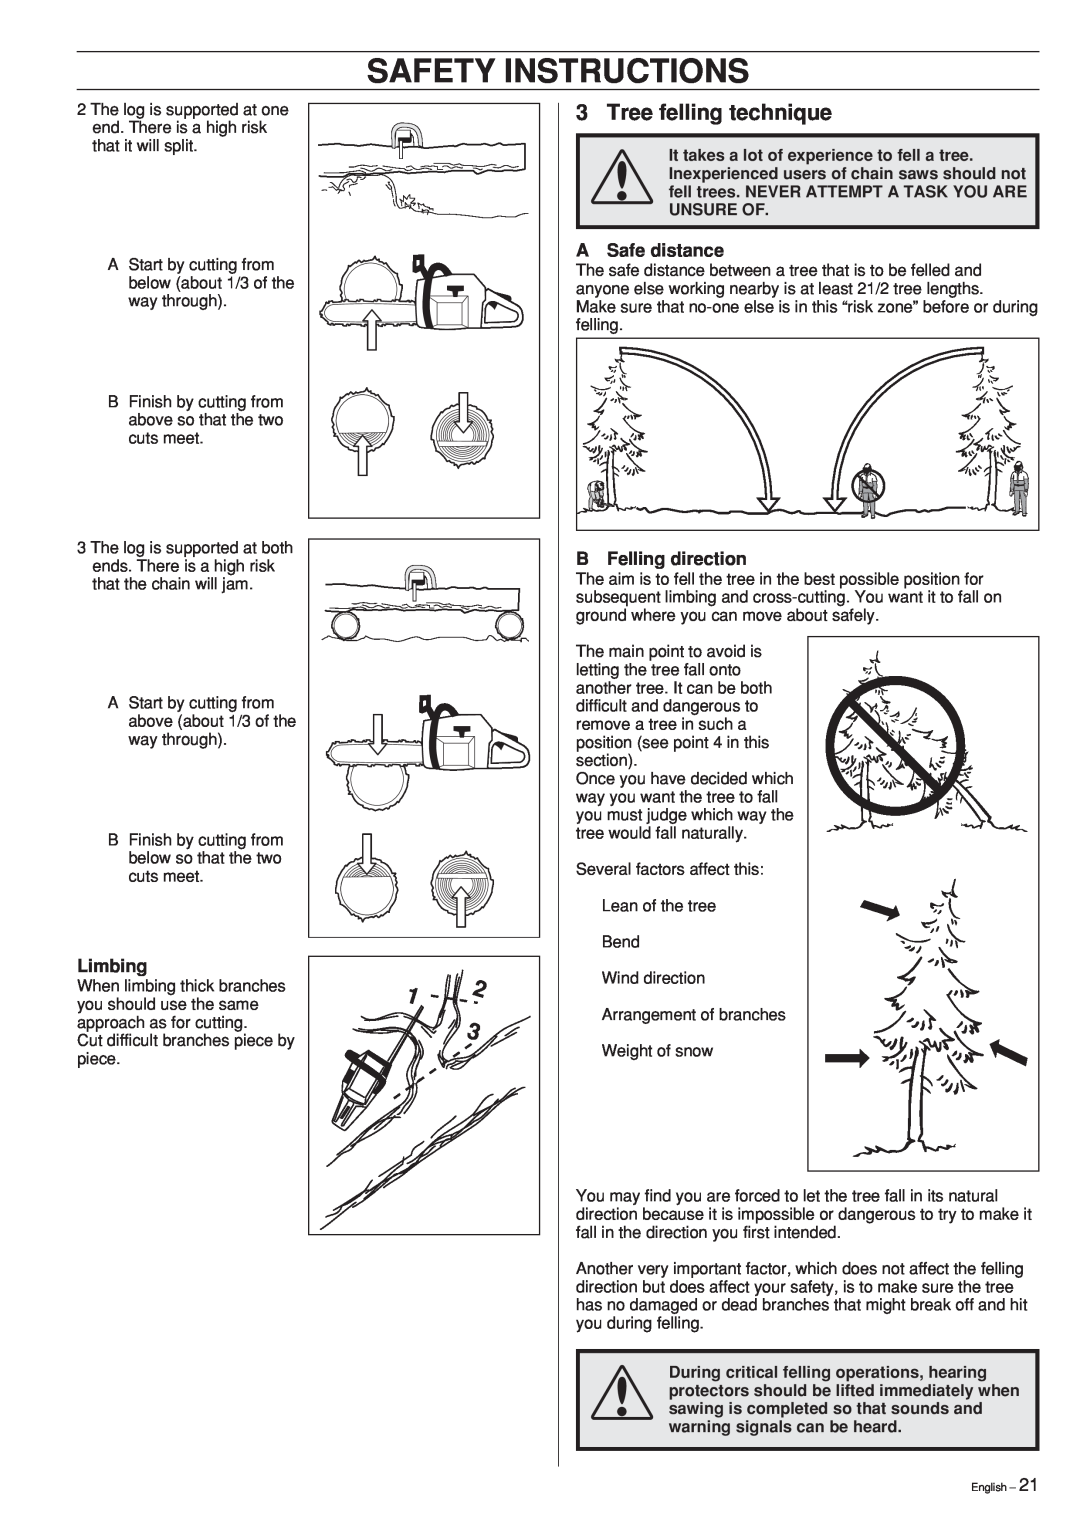 Husqvarna 346XP 351 manual Safety Instructions, Tree felling technique, A Safe distance, Limbing, B Felling direction 